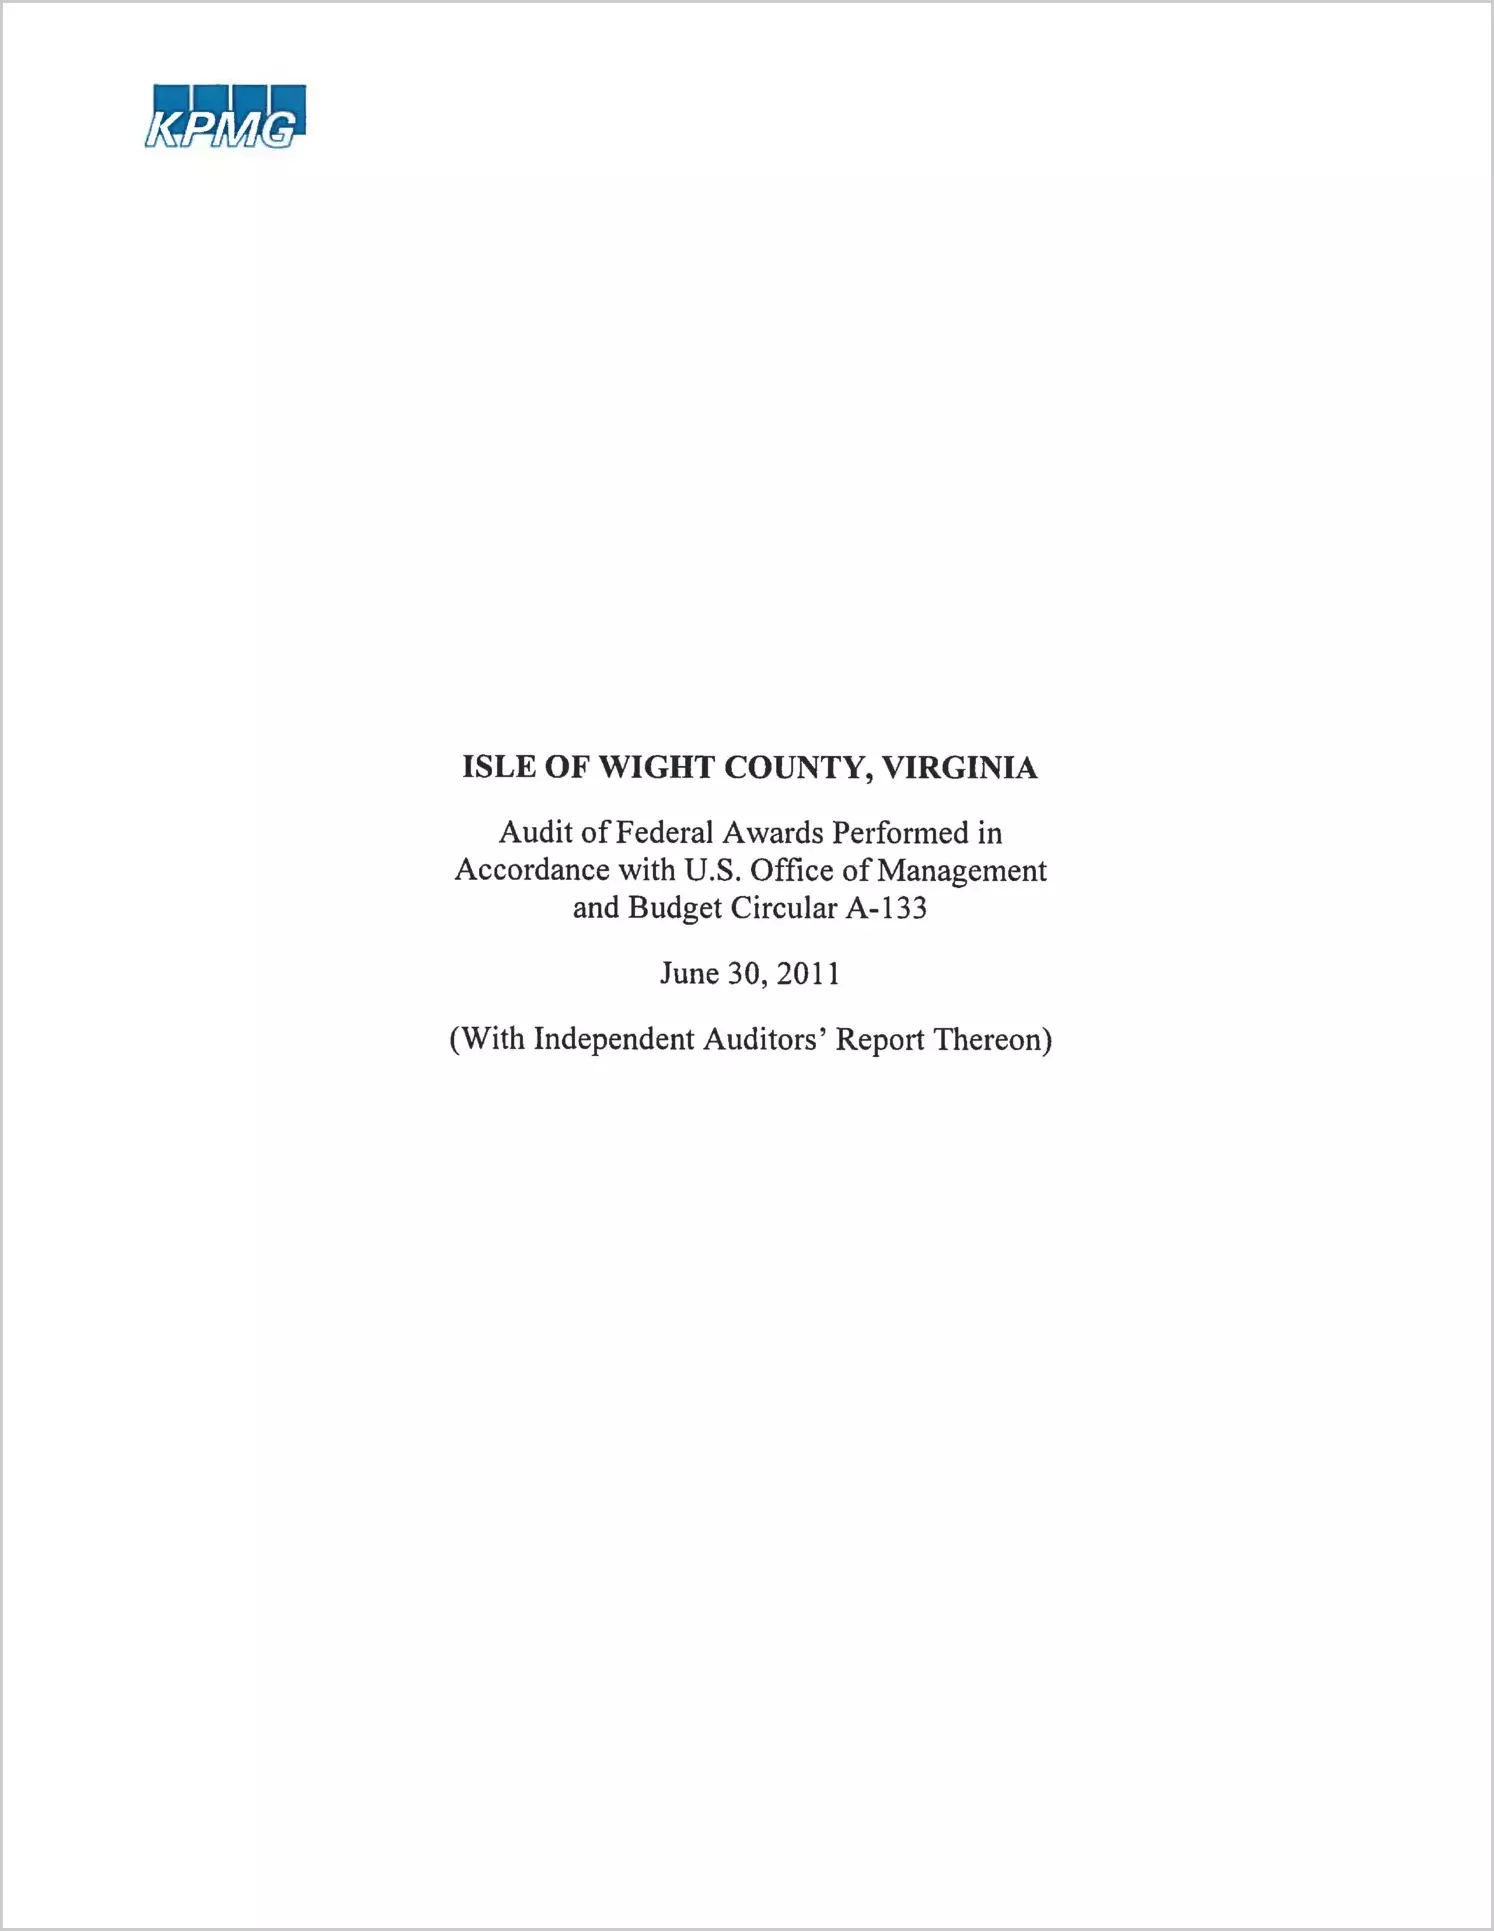 2011 Single Audit Report for County of Isle of Wight